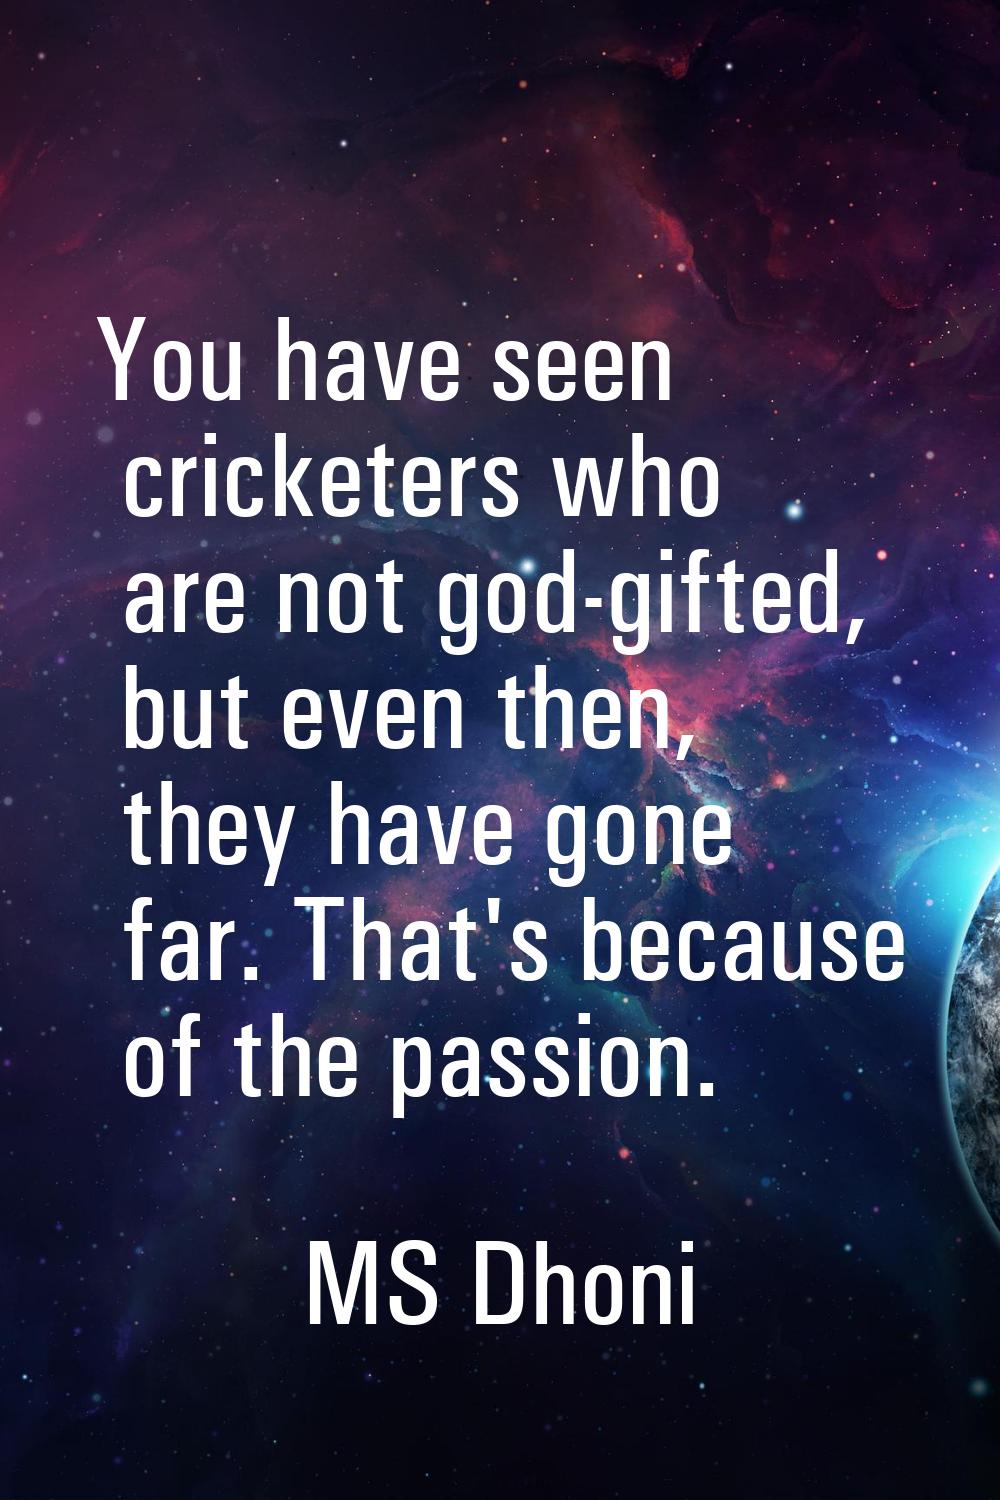 You have seen cricketers who are not god-gifted, but even then, they have gone far. That's because 